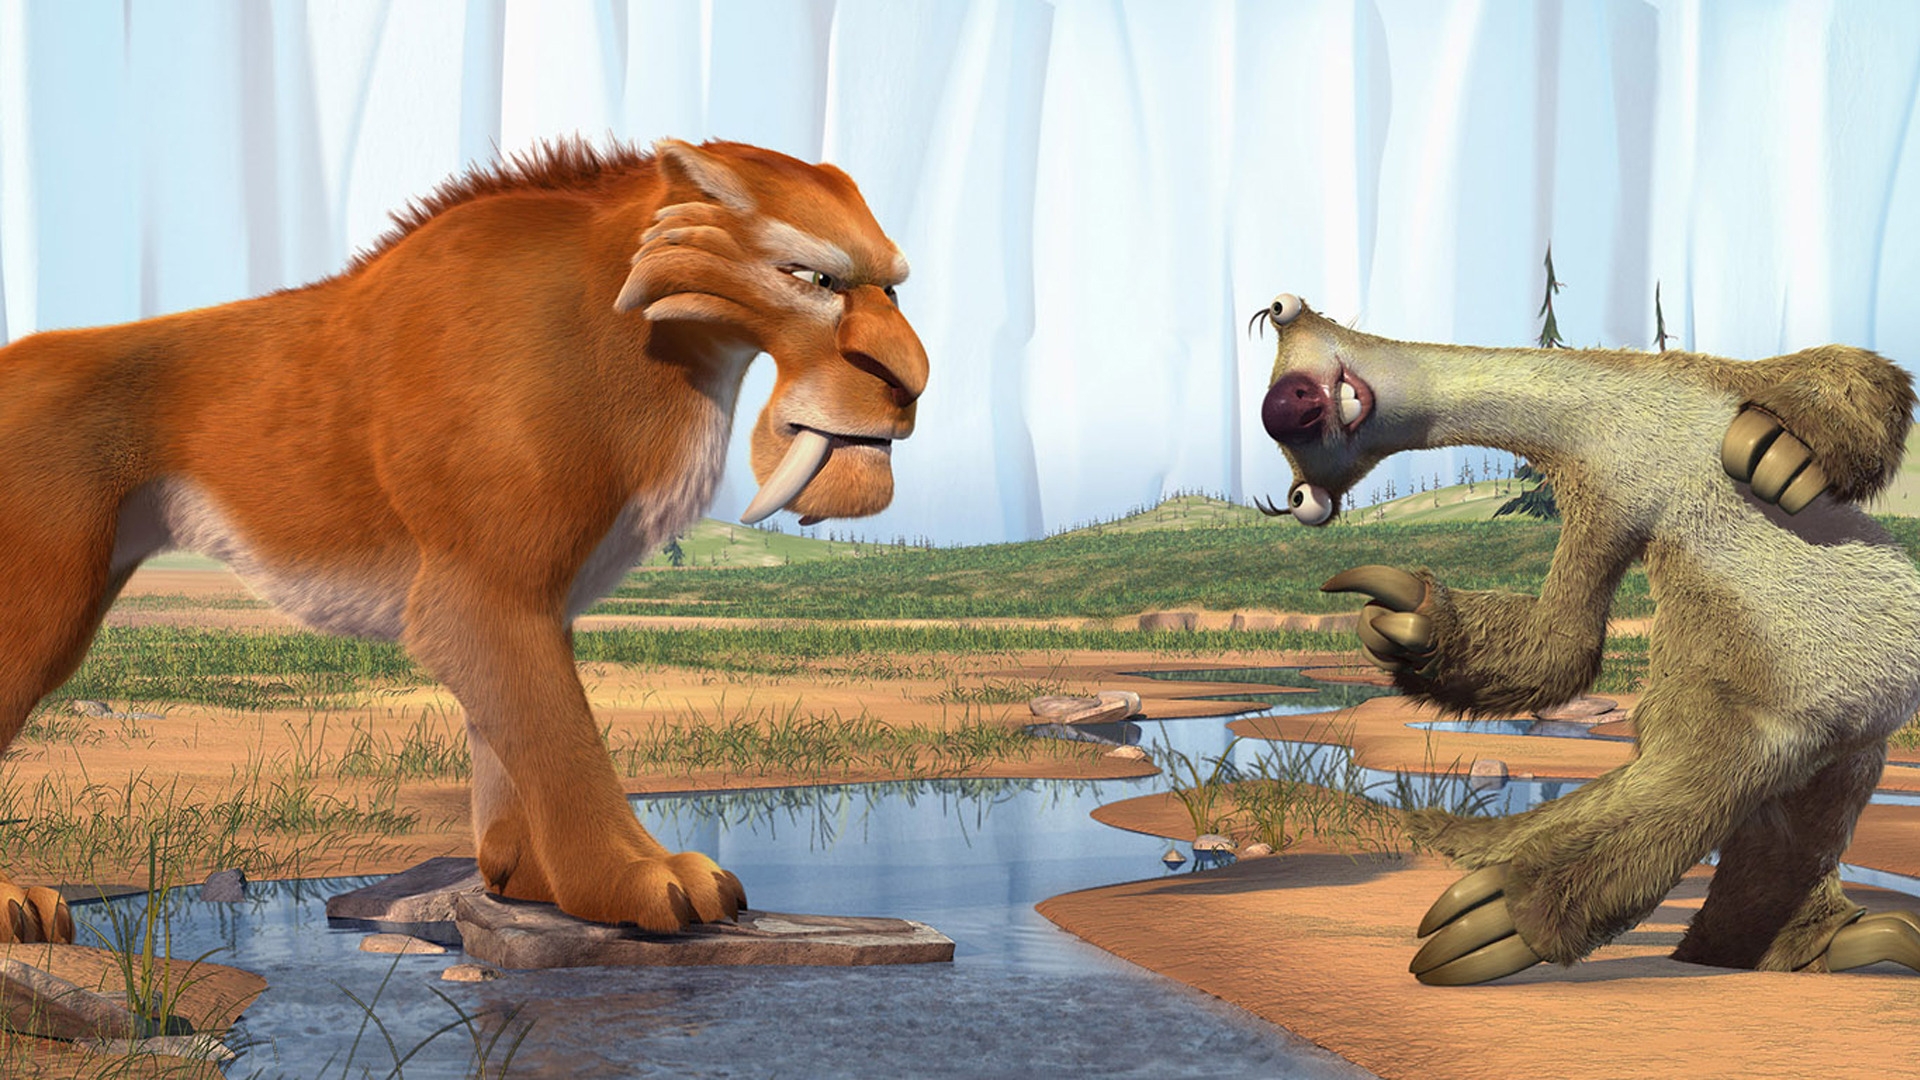 Ice Age Diego and Sid for 1920 x 1080 HDTV 1080p resolution